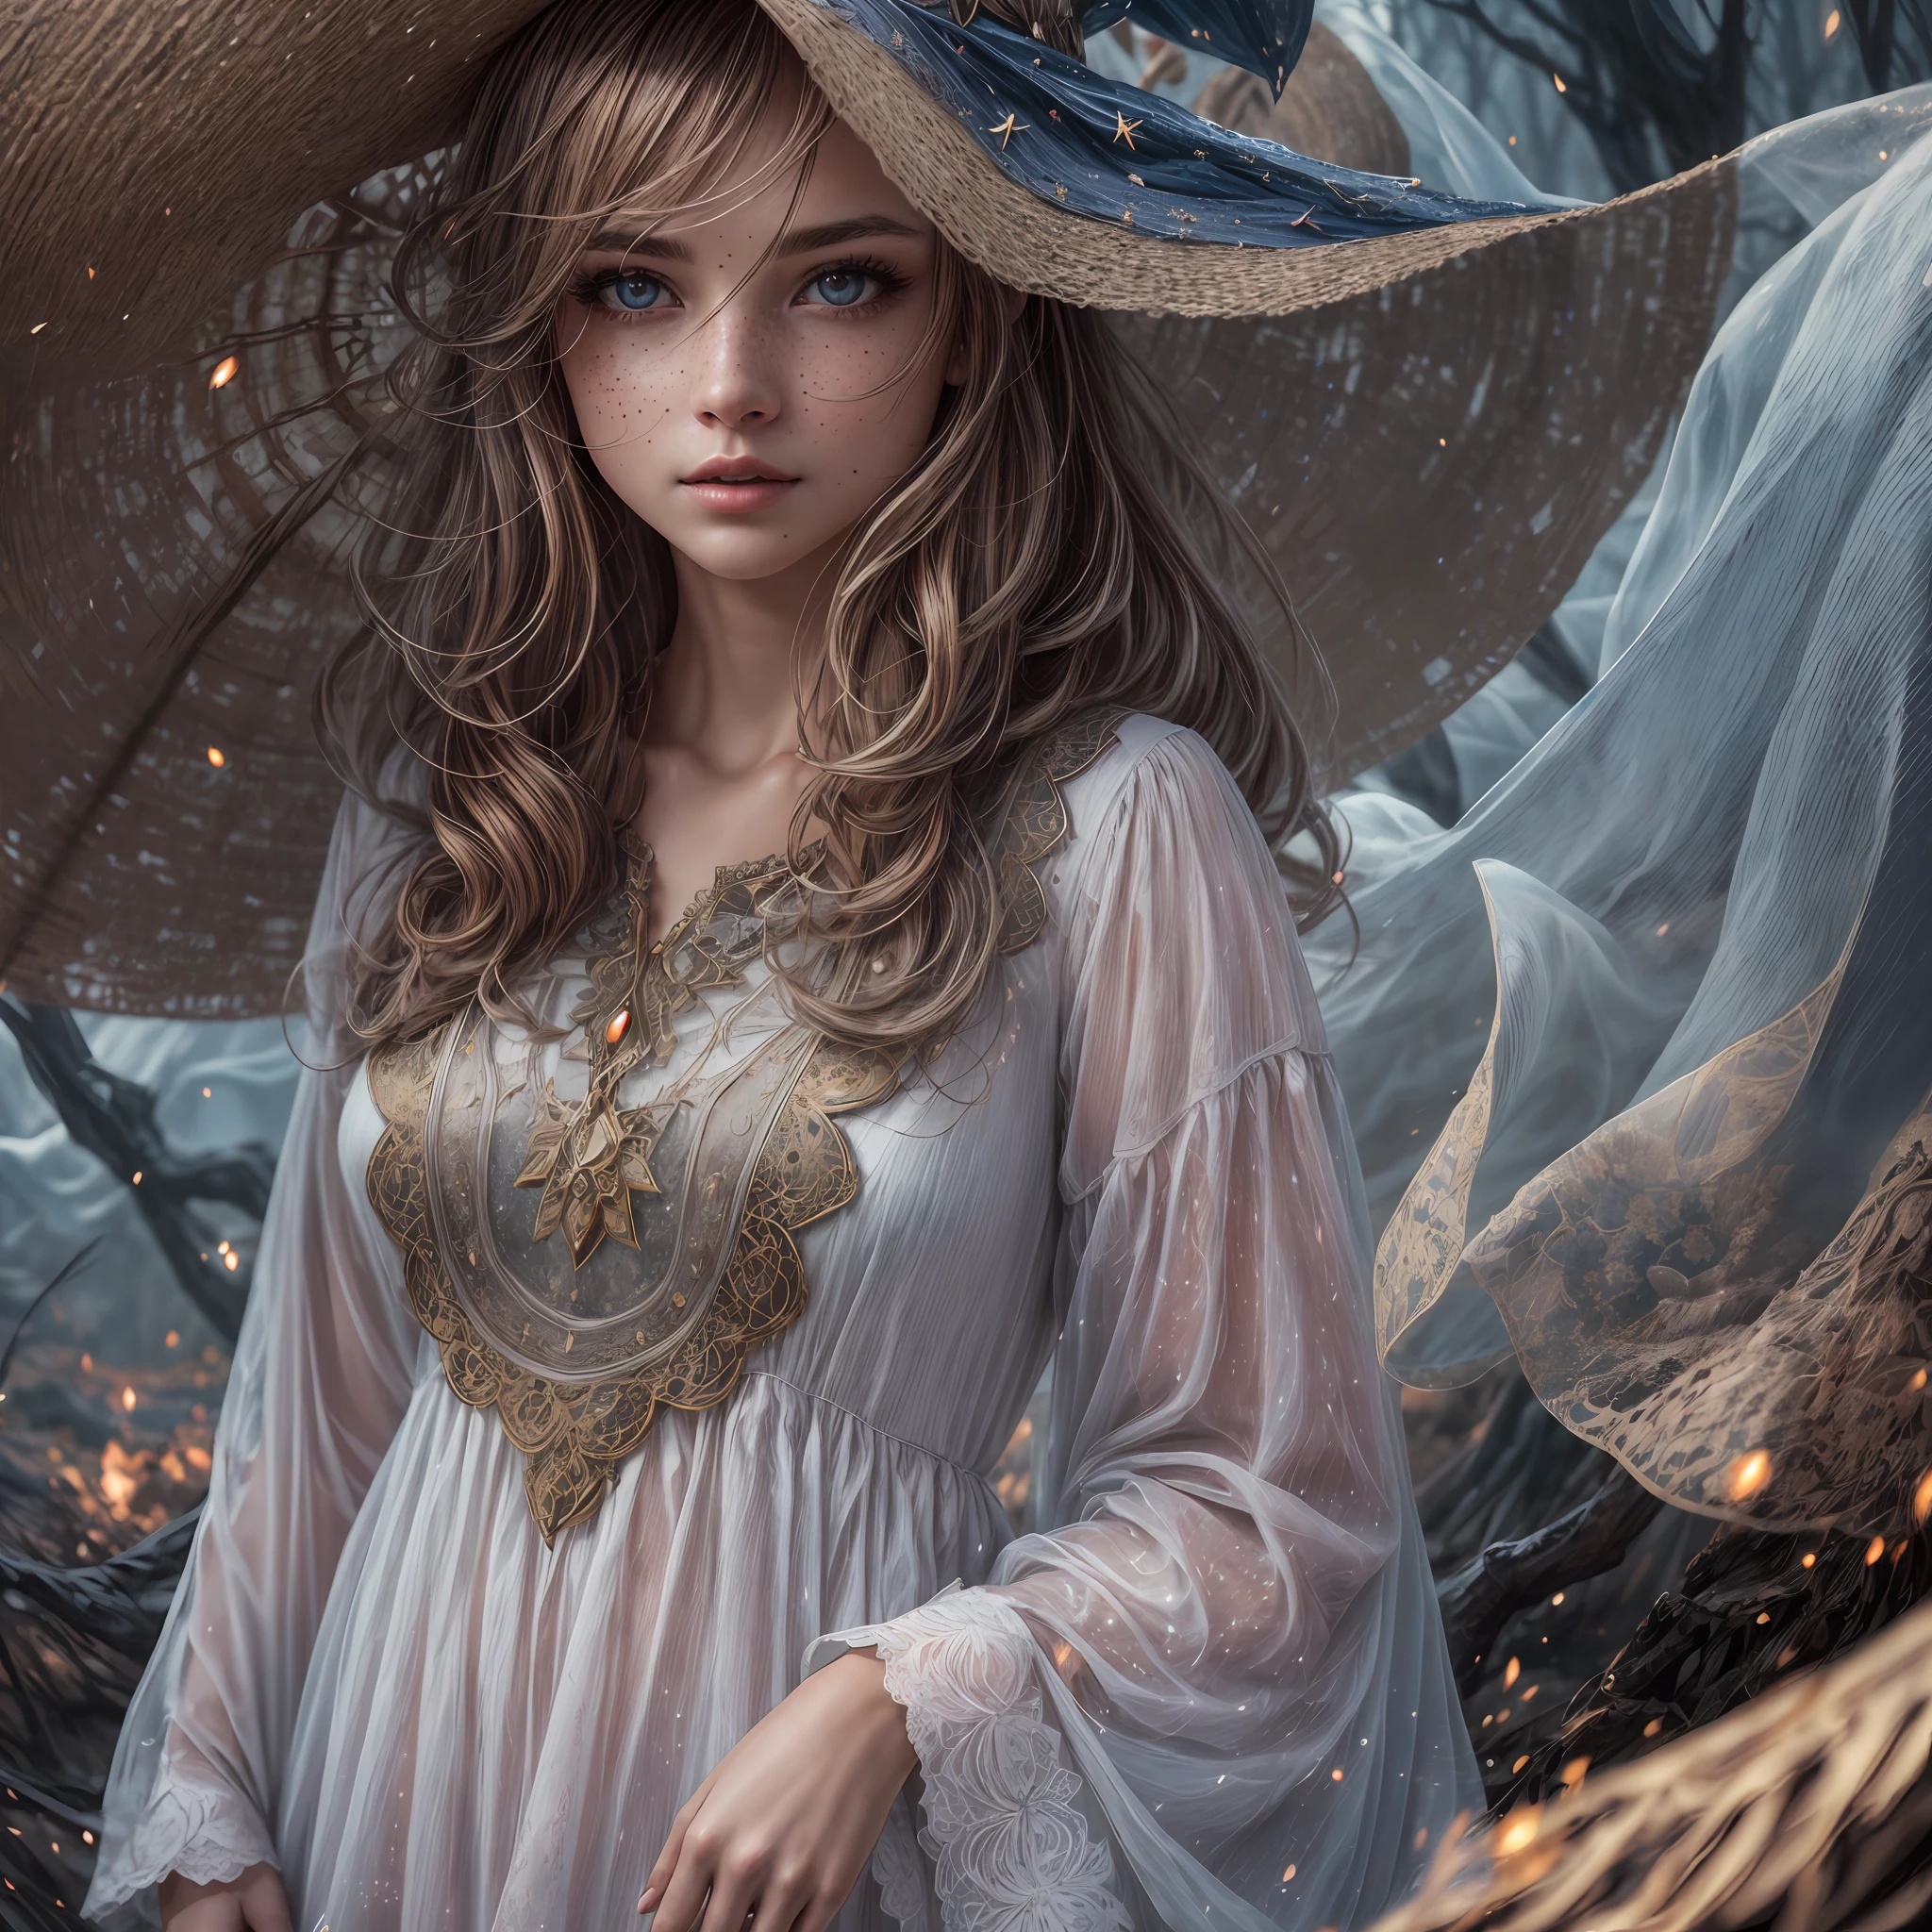 photorealistic, 35mm, intricate details, hdr, intricate details, hyperdetailed, natural skin texture, hyperrealism, sharp, 1 girl, adult (elven:0.7) woman, freckles, grey eyes, chestnut layered hair, portrait, looking down, solo, half shot, detailed background, witch hat, witch, magical atmosphere, hair flowing in the wind, red trimmed light colored clothes, whirlwind of swirling magic spell in the air, dark magic, (style-swirlmagic:0.8), floating particles, desolate battlefield background, backlighting, (((masterpiece))), (((masterwork))), ((top quality)), ((best quality)), ((highest quality)), ((highest fidelity)), ((highest resolution)), ((highres)), ((highest detail)), ((highly detailed)), ((hyper-detailed)), (((detail enhancement))), ((deeply detailed)), ((8k resolution)), awe inspiring, breathtaking, uhd, hdr, fhd, 8k, 16k, 32k, k, meticulous, intricate, intimate, nuanced, (((the most beautiful images in existence))), (((the most beautiful artwork in the world))), (raw photo, film grain), caustics, subsurface scattering, reflections,